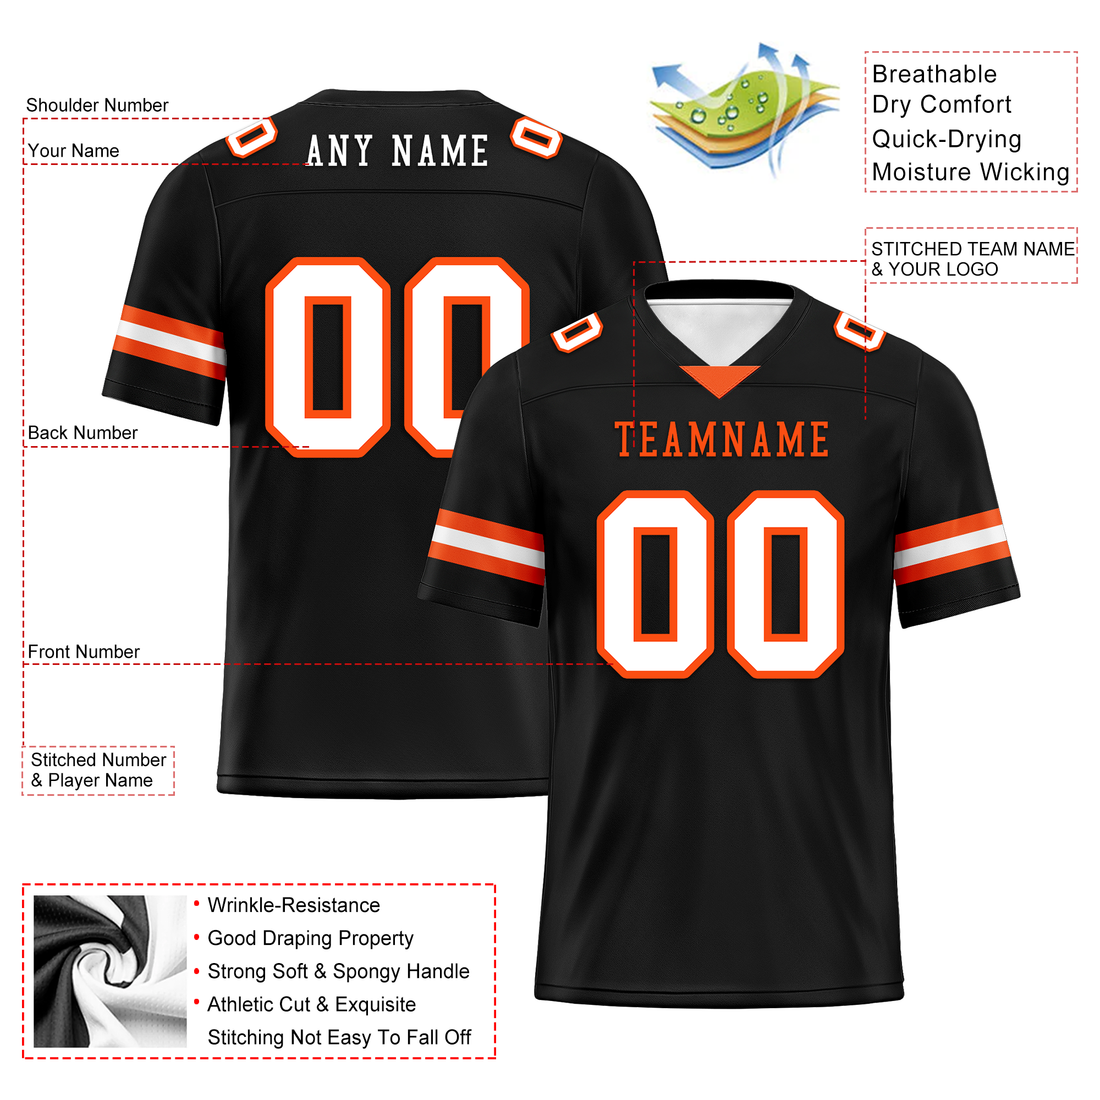 Custom Black Classic Style Personalized Authentic Football Jersey FBJ02-bd0a70c0